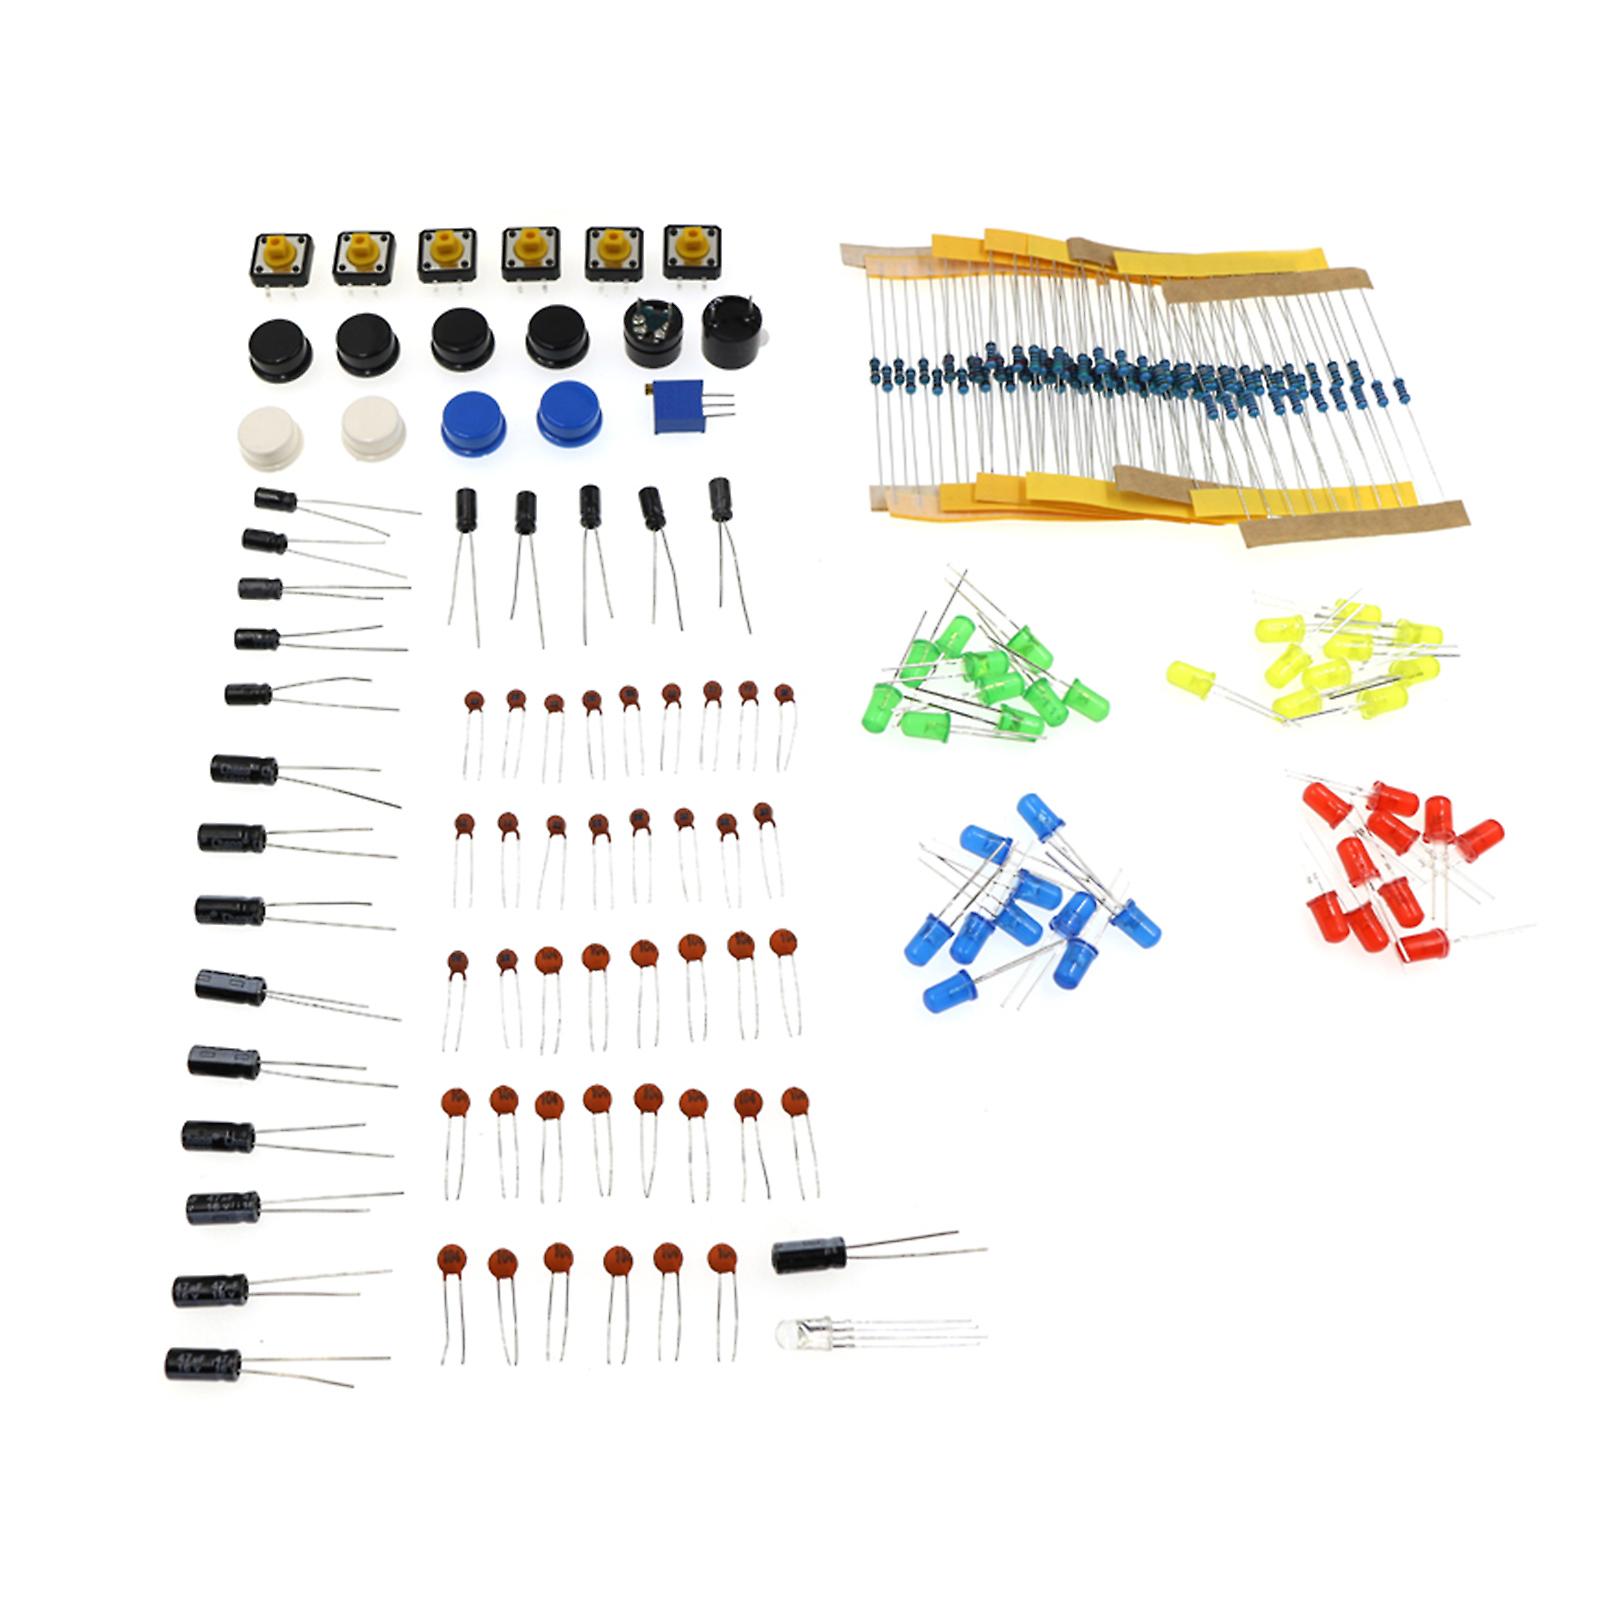 Diy Electronic Component Assortment Box Kit With Breadboard Capacitors Resistors Transistors Diodes Leds Jumper Cable With Storage Box